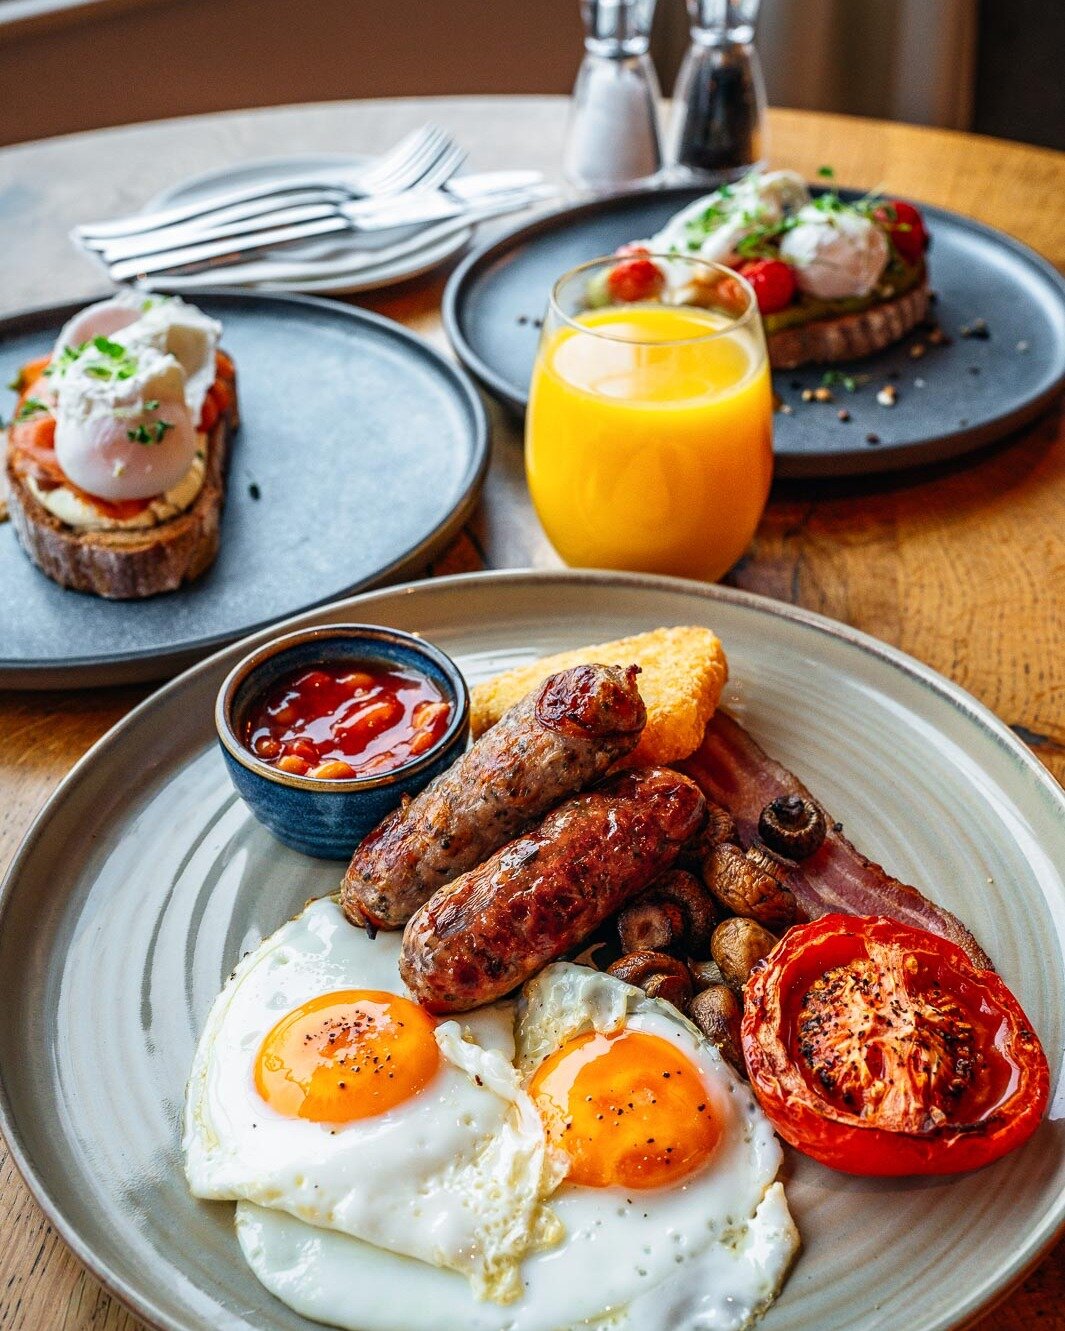 April fun at The Oak...

🍽️ Our set menu is now available Tuesday to Thursday lunch and dinner, plus lunchtime on Fridays.
🍳 Breakfast Club returns on Saturday 13th April, 9am to 11.30am. Now also including our breakfast package including filter co